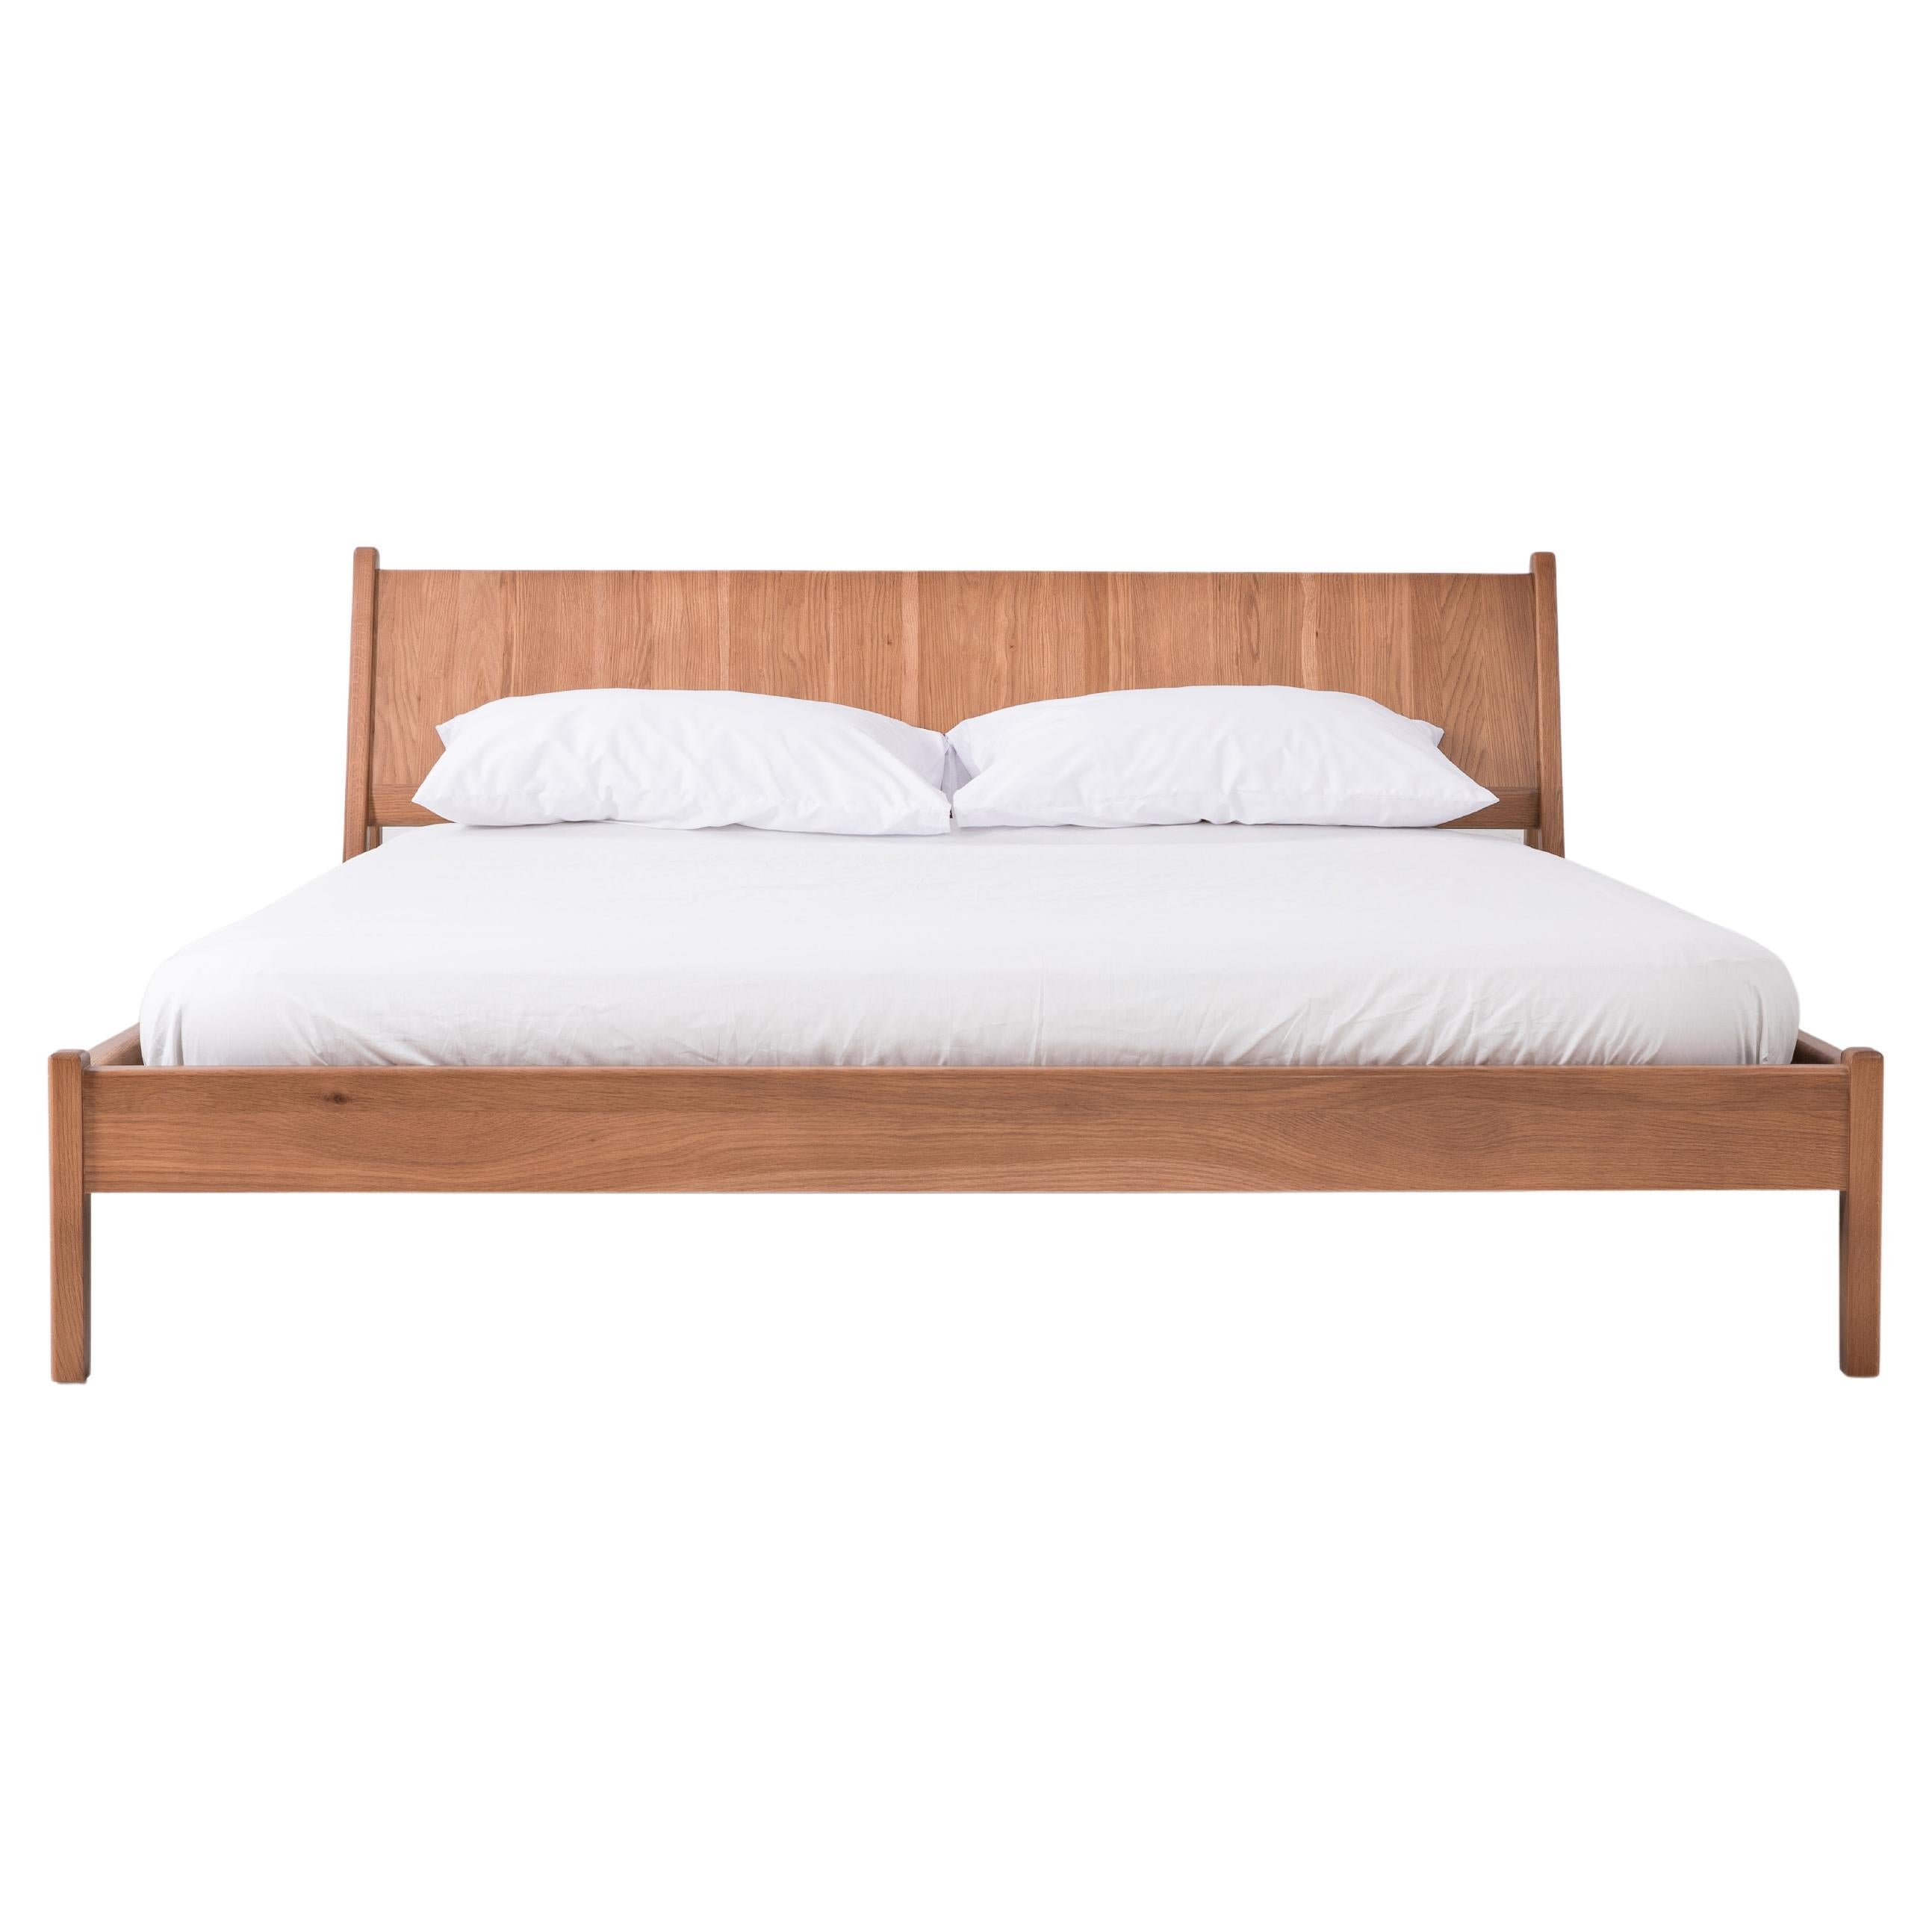 Plume King Bed in Sienna by Sun at Six, Minimalist Wood Bed